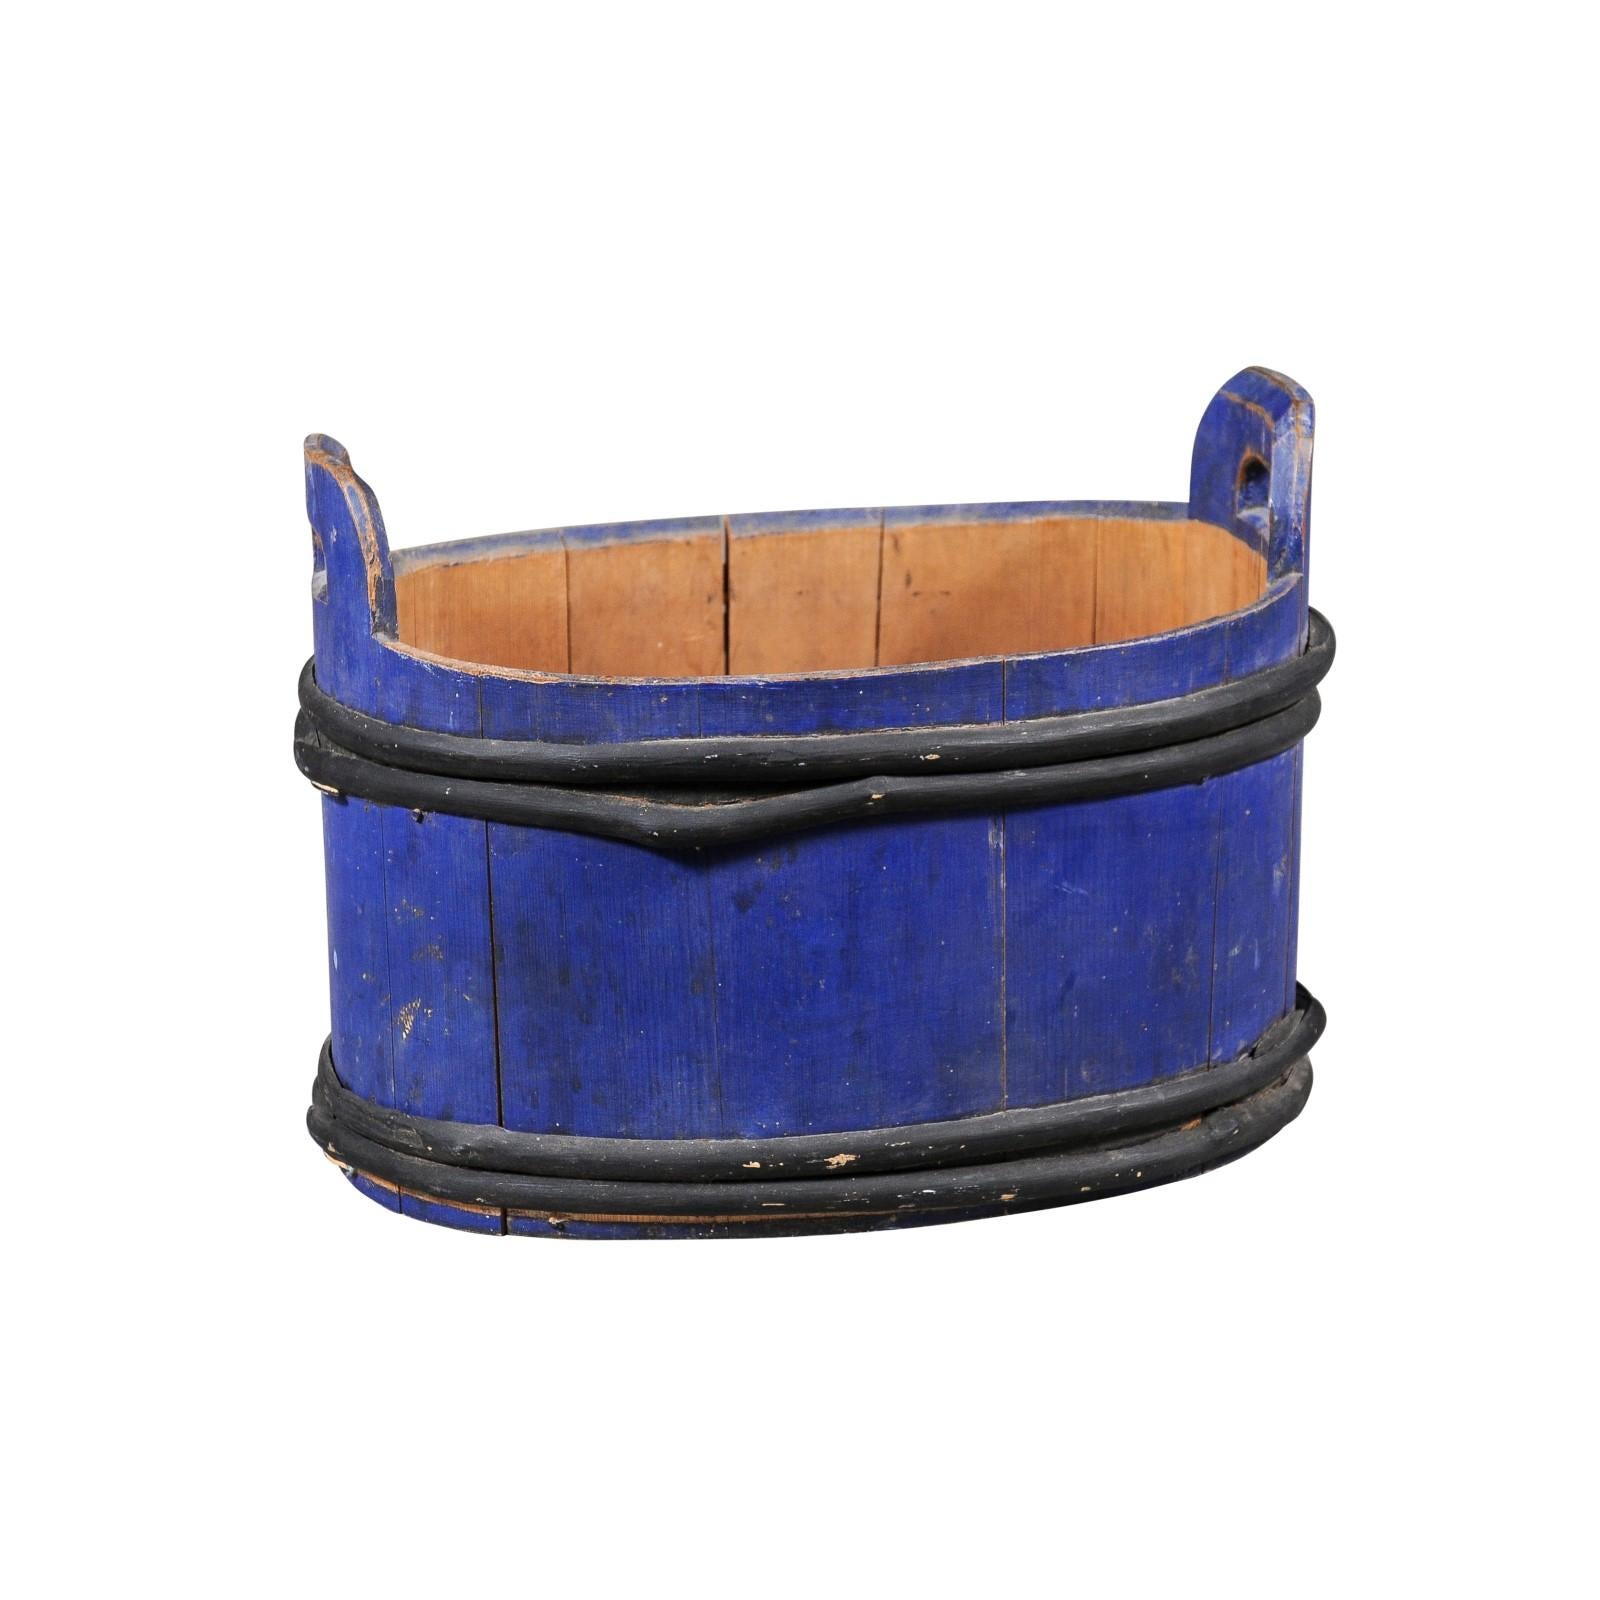 A Swedish oval-shaped milk tub from the late 19th century with blue paint and black accents. Created in Sweden during the last quarter of the 19th century, this milk tub attracts our attention with its rustic character and distressed blue paint.